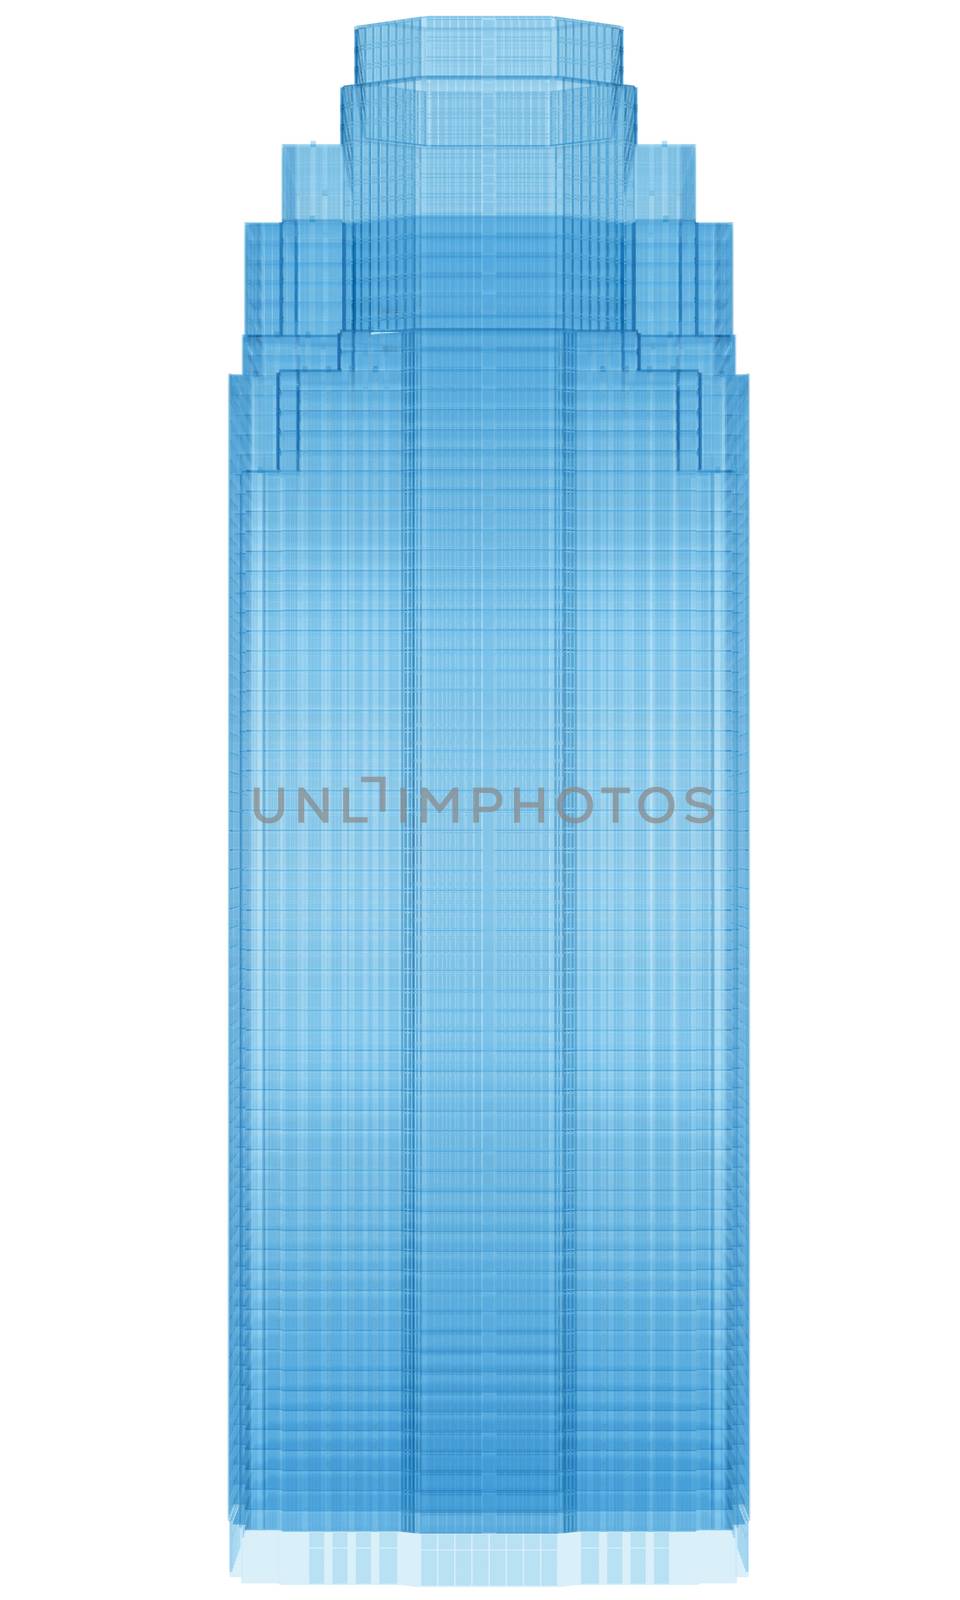 Glass skyscraper. Isolated render on a white background